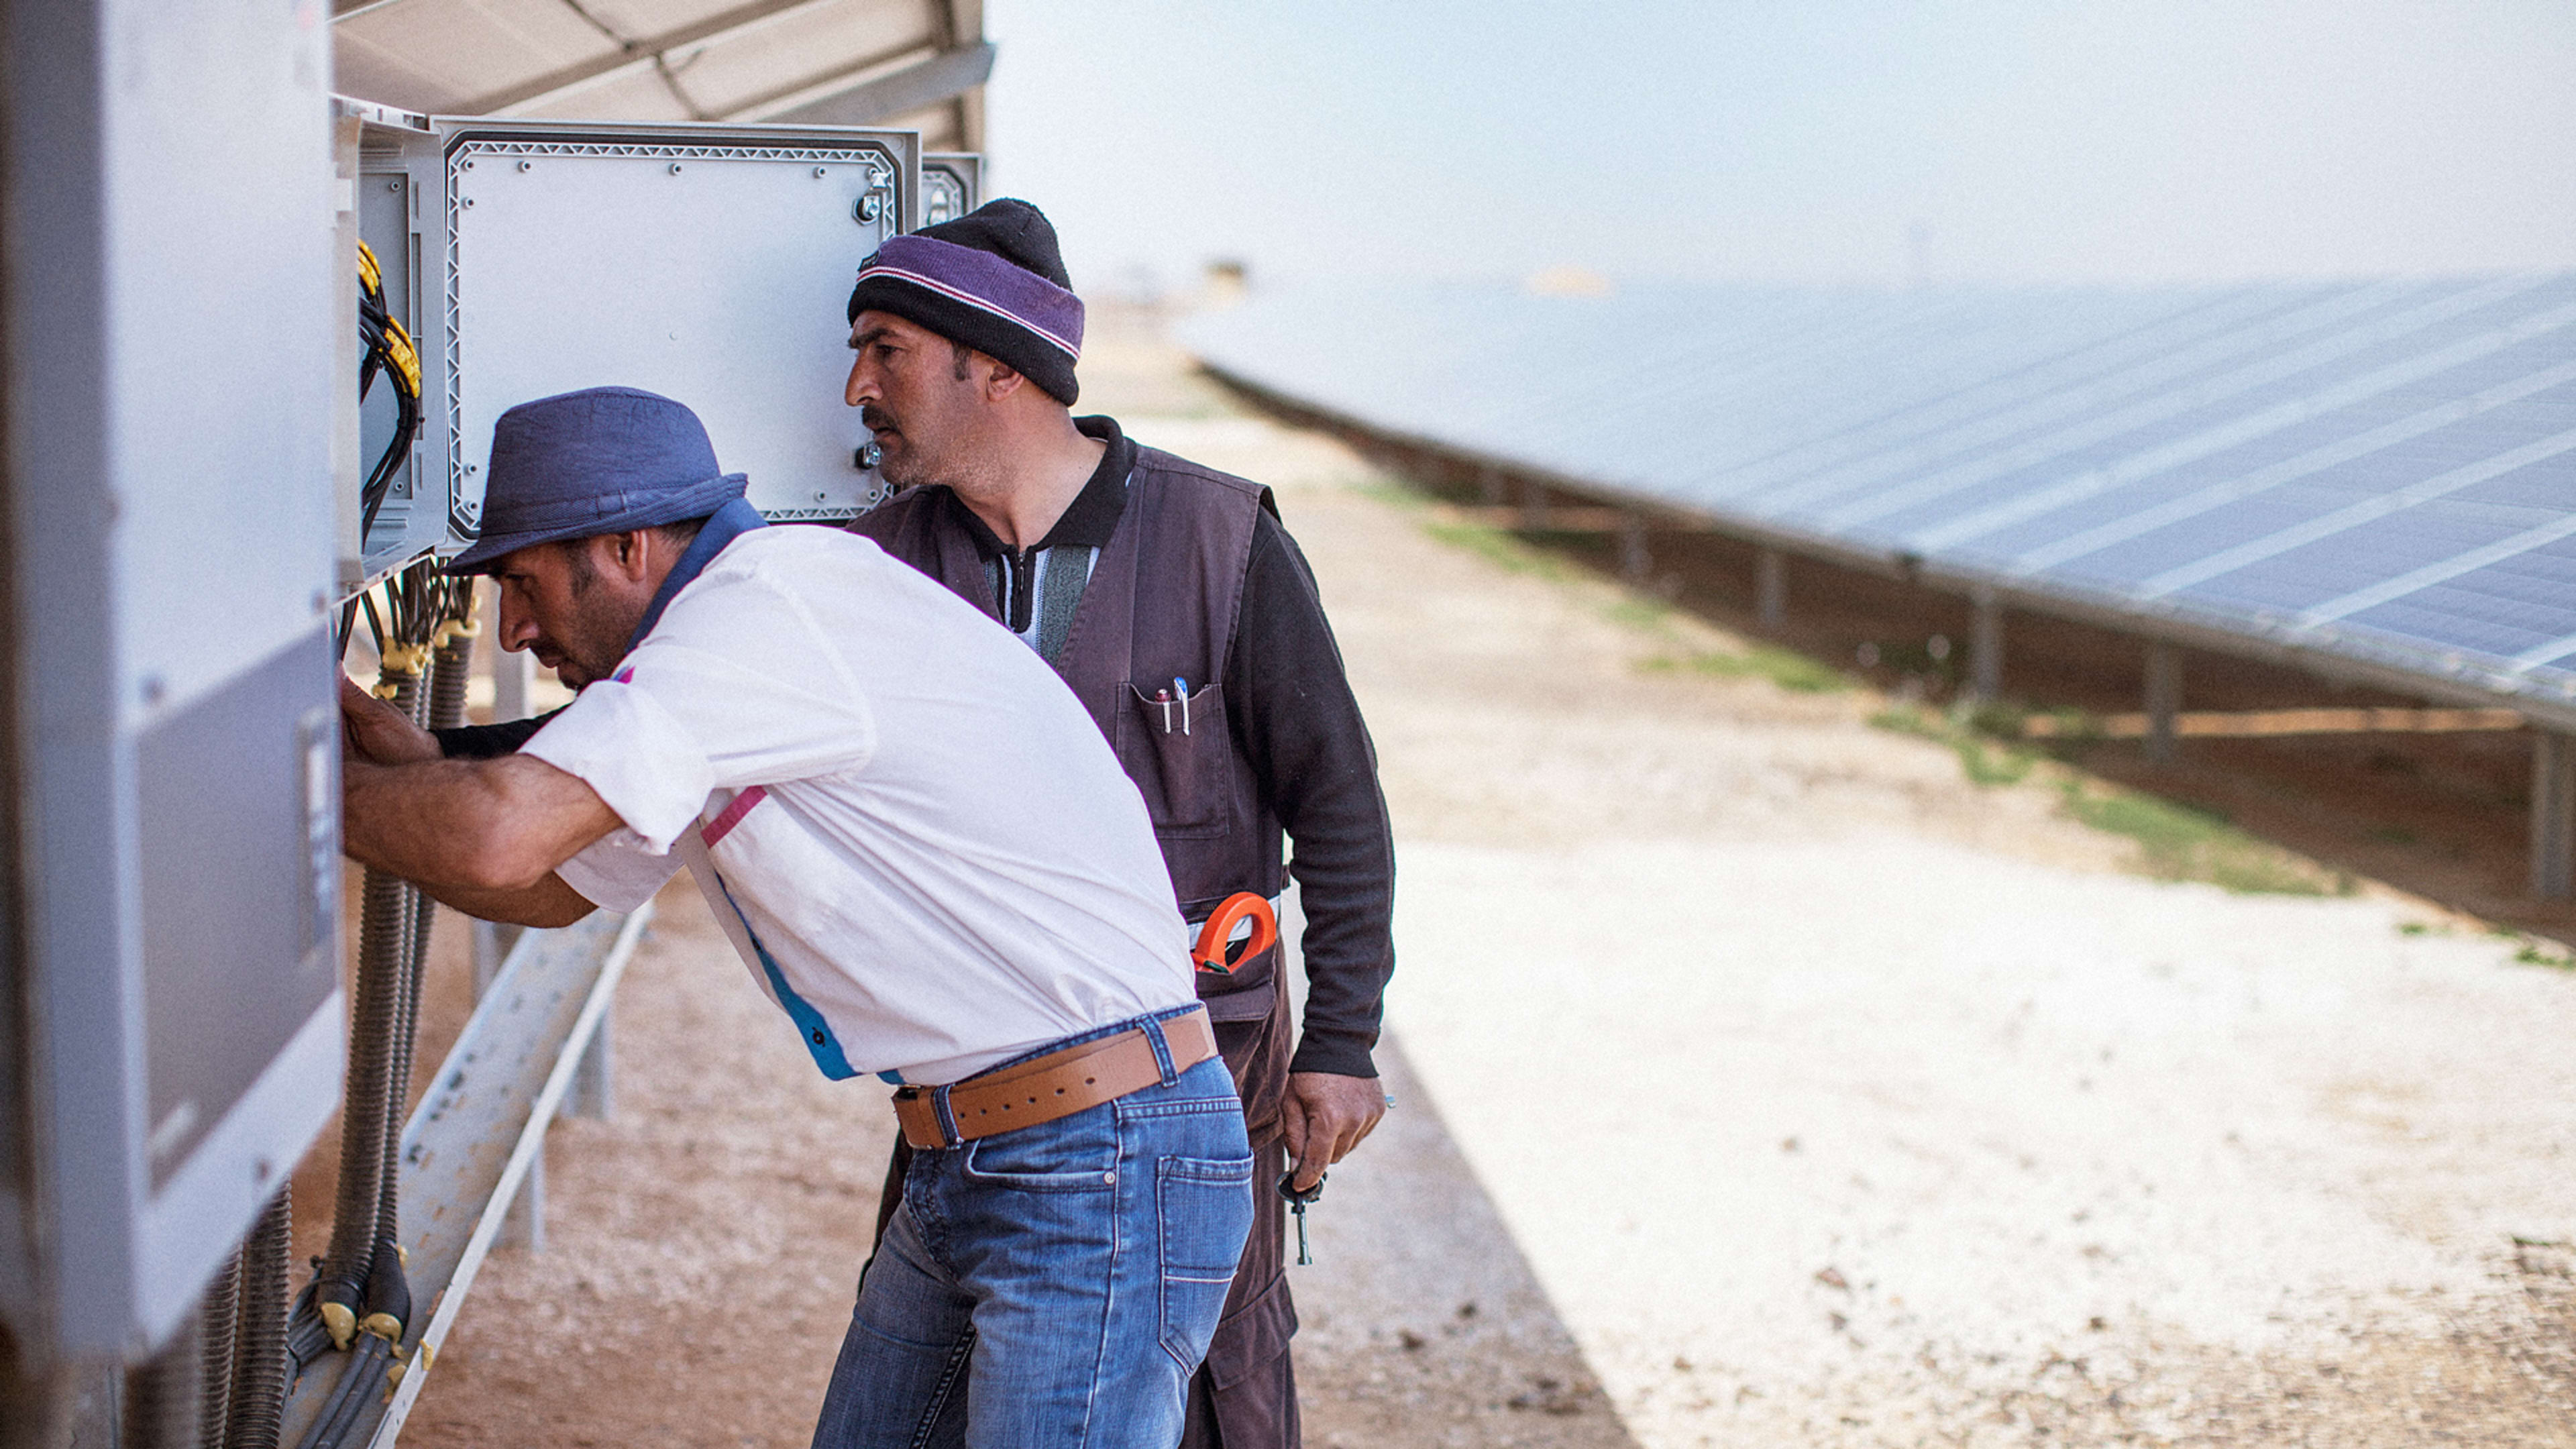 This Refugee Camp In The Jordanian Desert Now Has Its Own Solar Farm